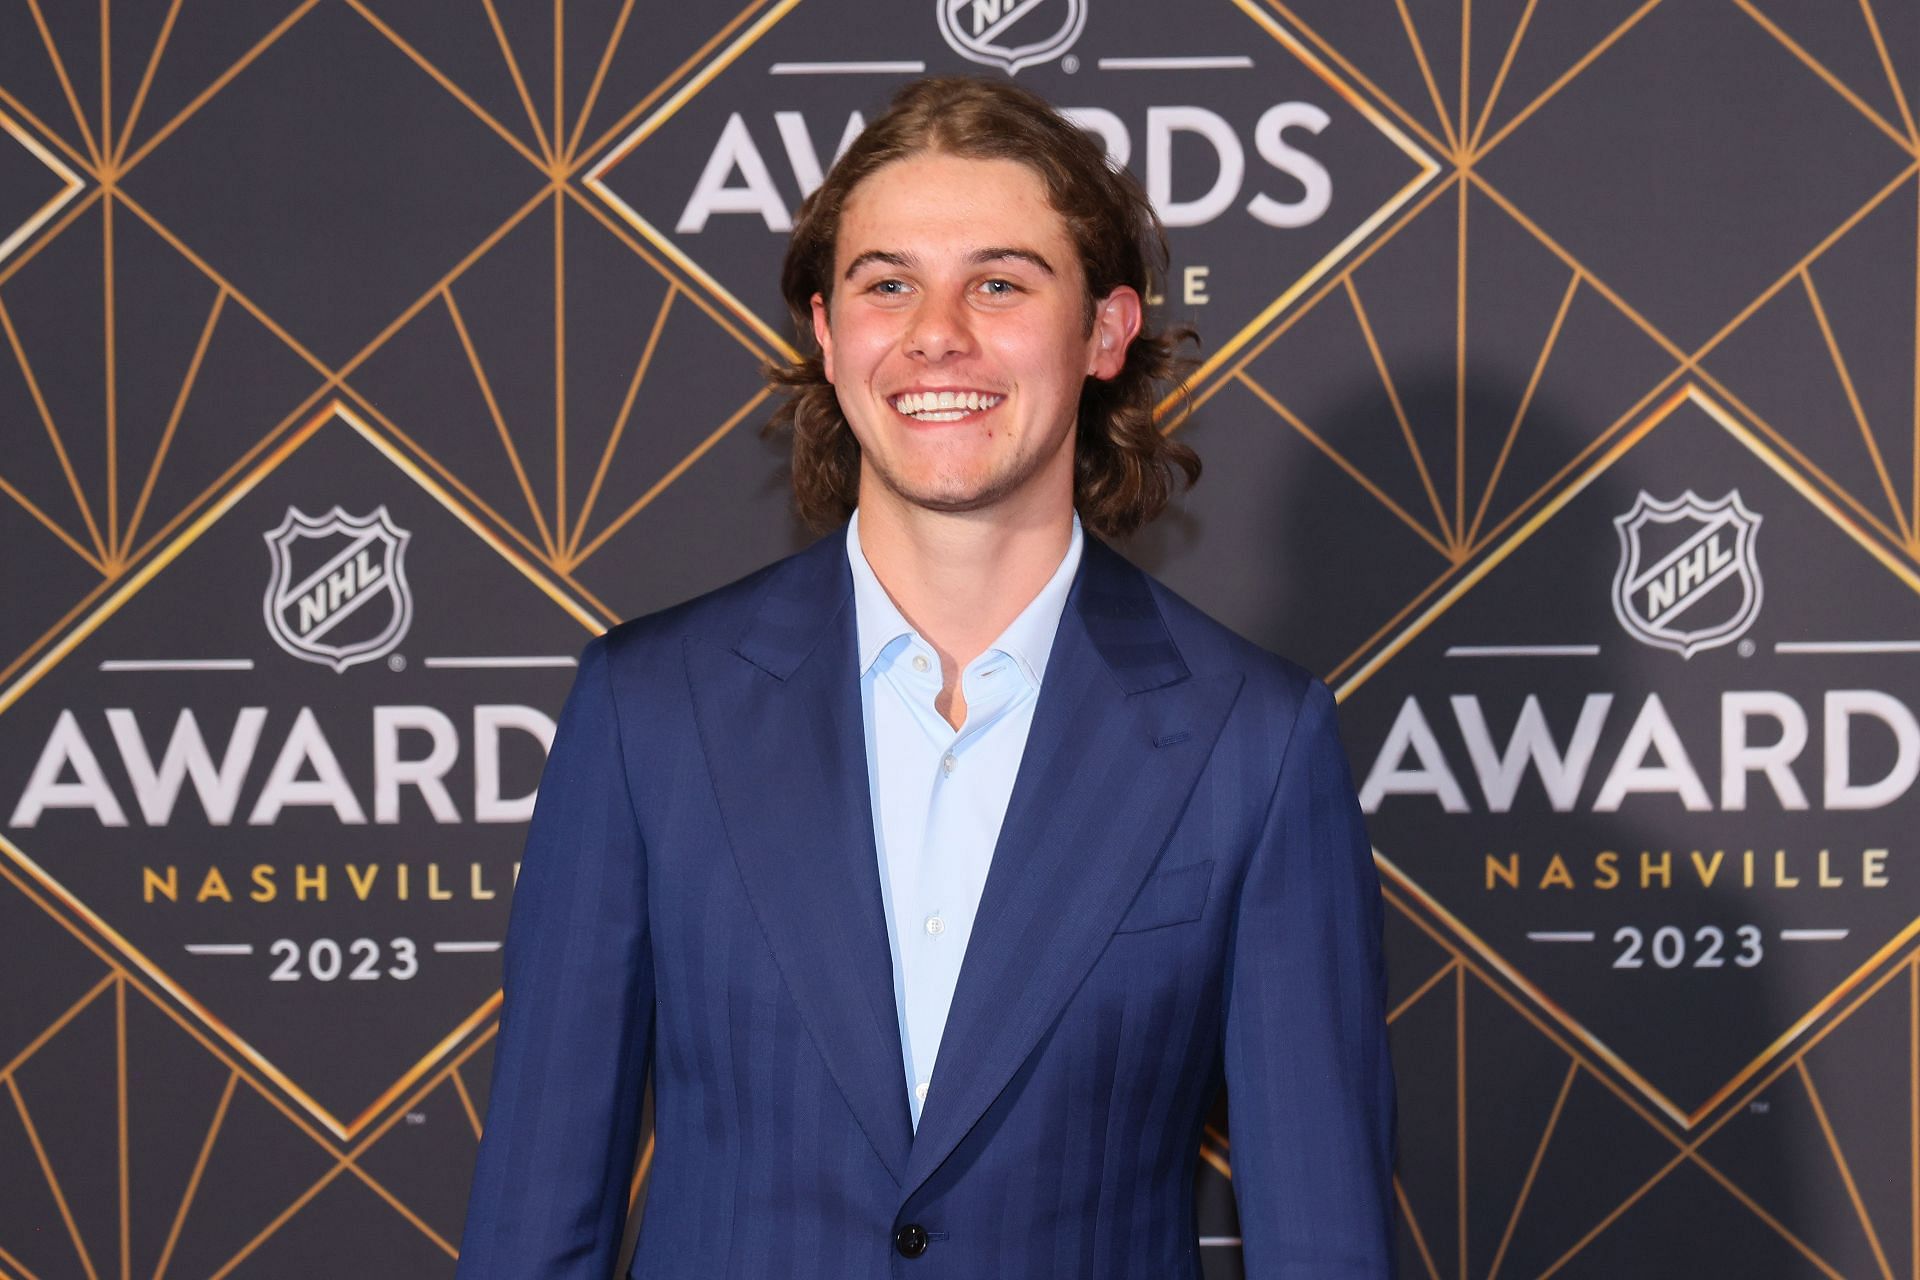 What happened to New Jersey Devils' Jack Hughes' tooth?